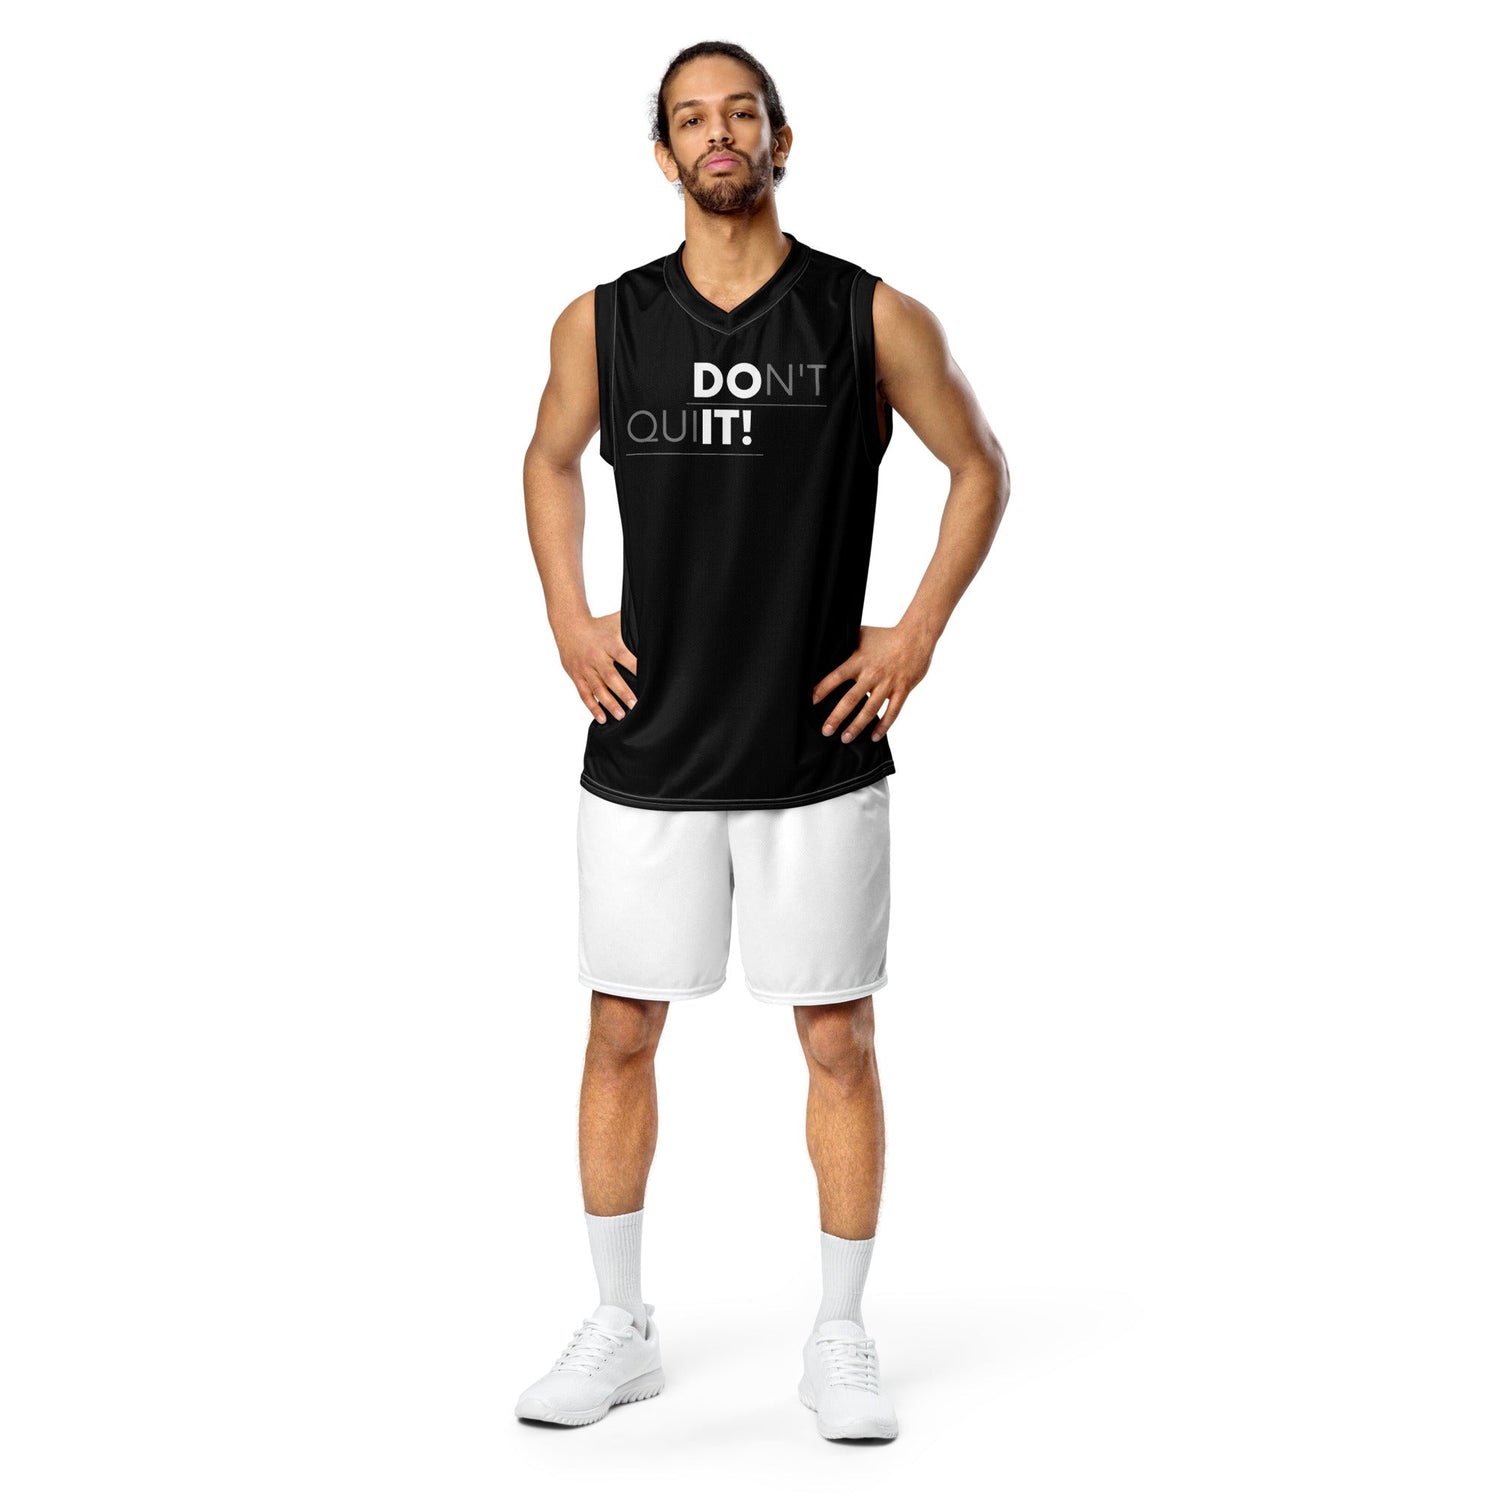 Don't Quit Unisex Basketball Jersey